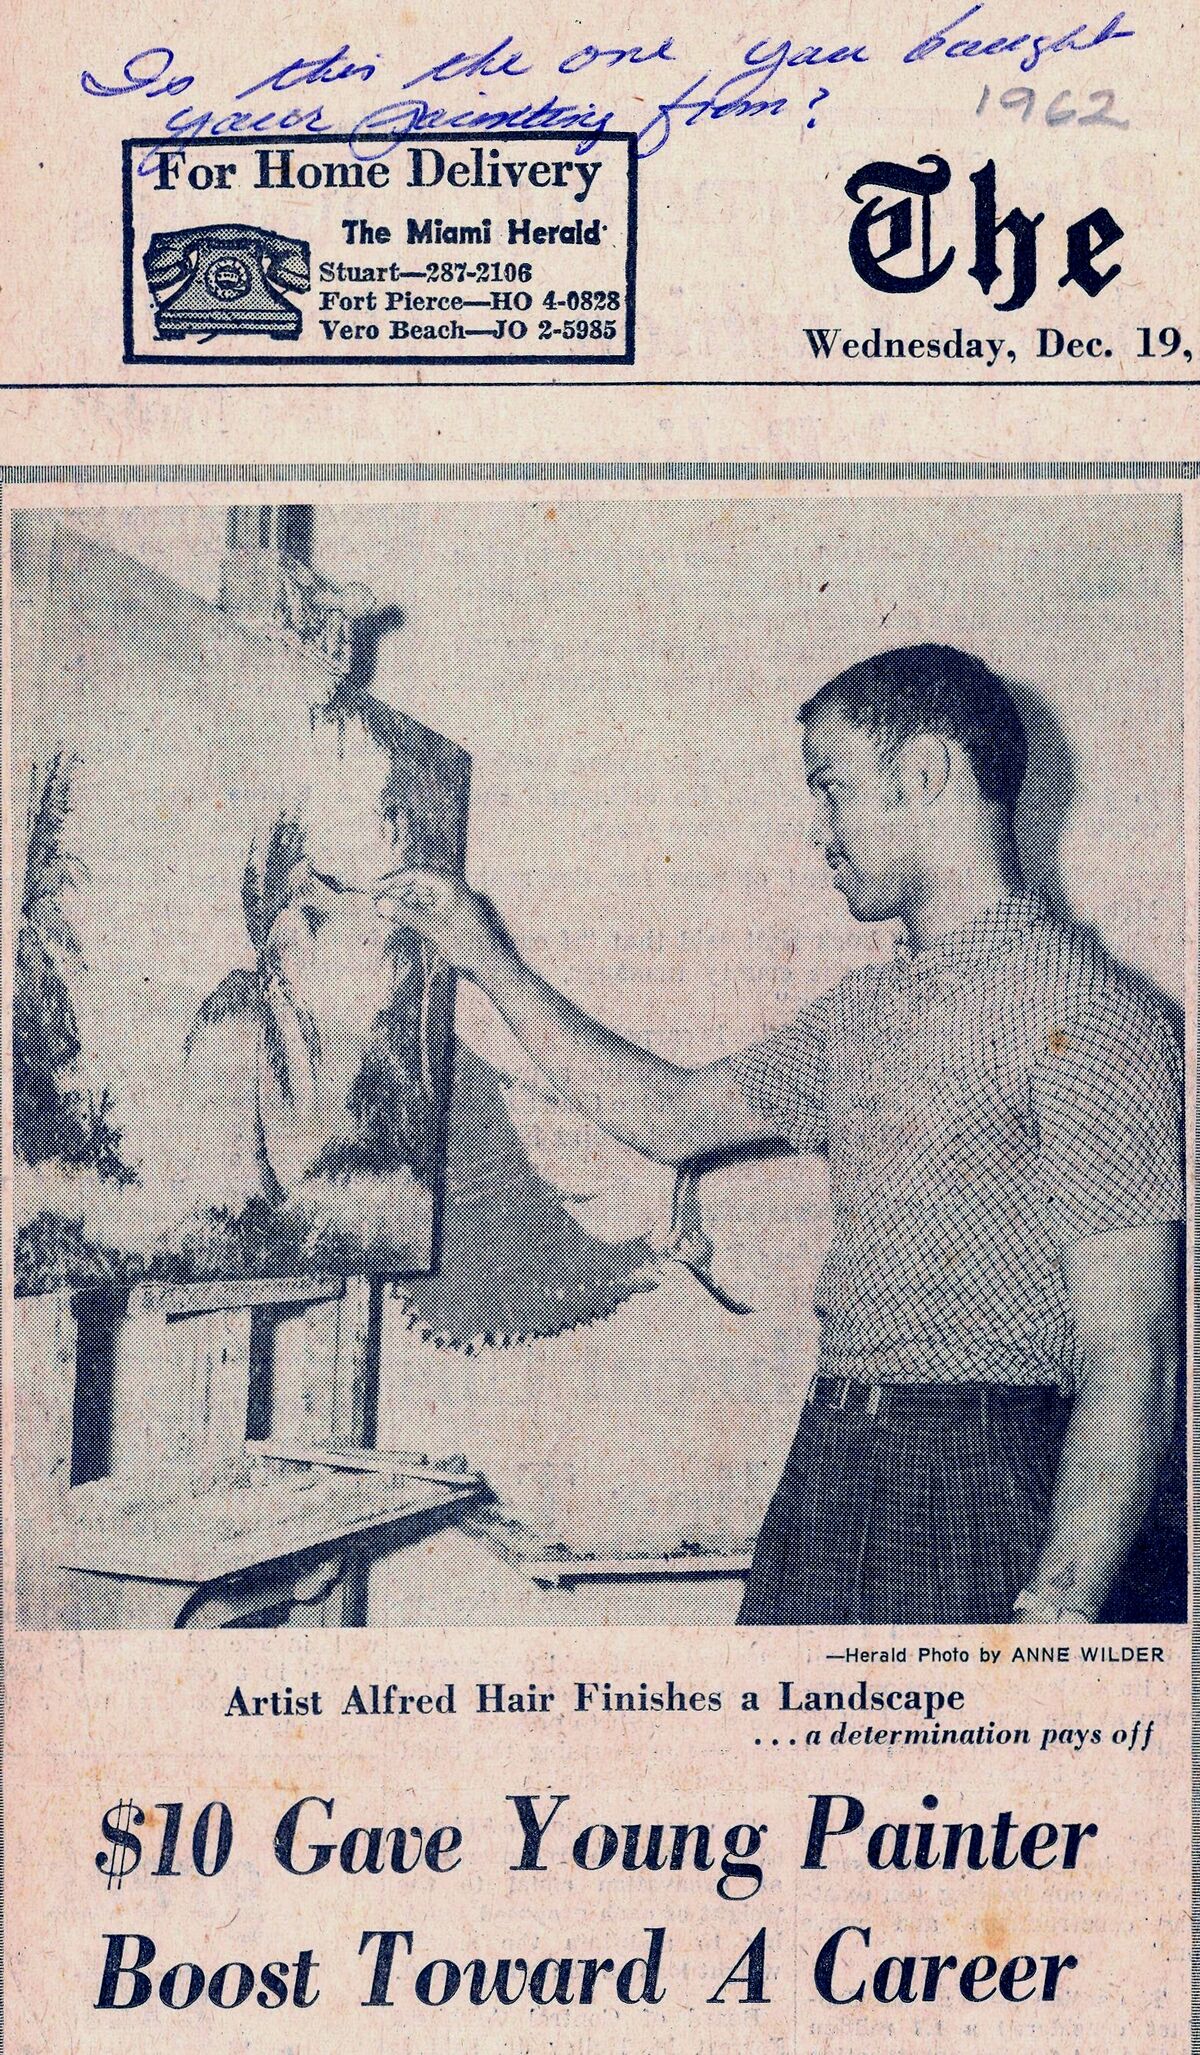 Article on Alfred Hair, 1962. Image courtesy of A.E. Backus Museum.